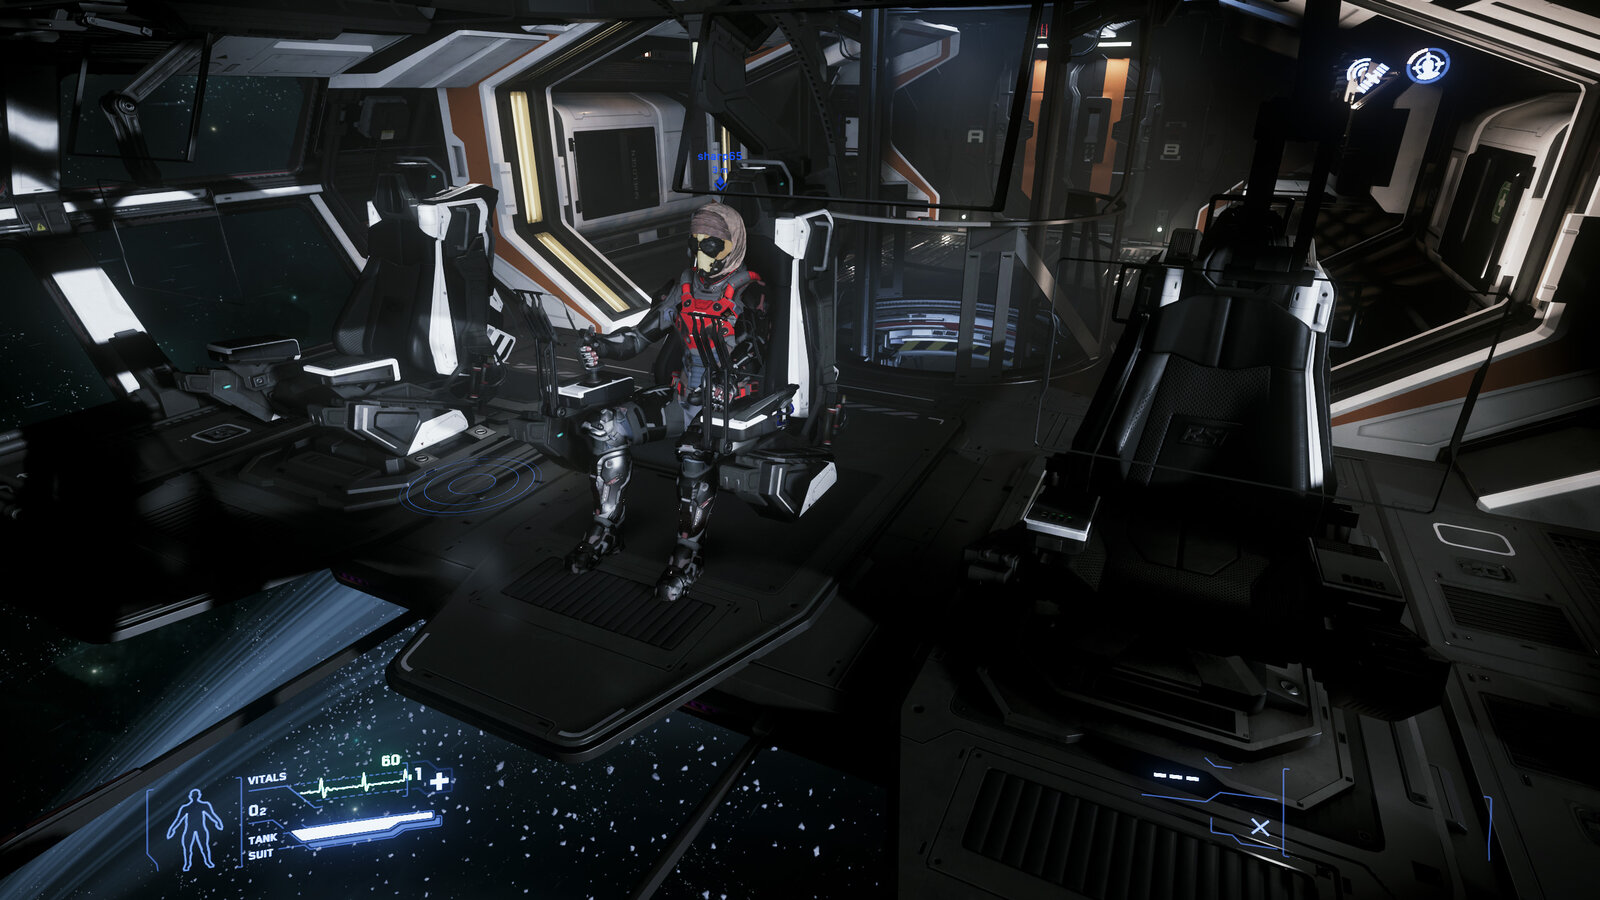 Sharp65 piloting his new ship the "Constellation"